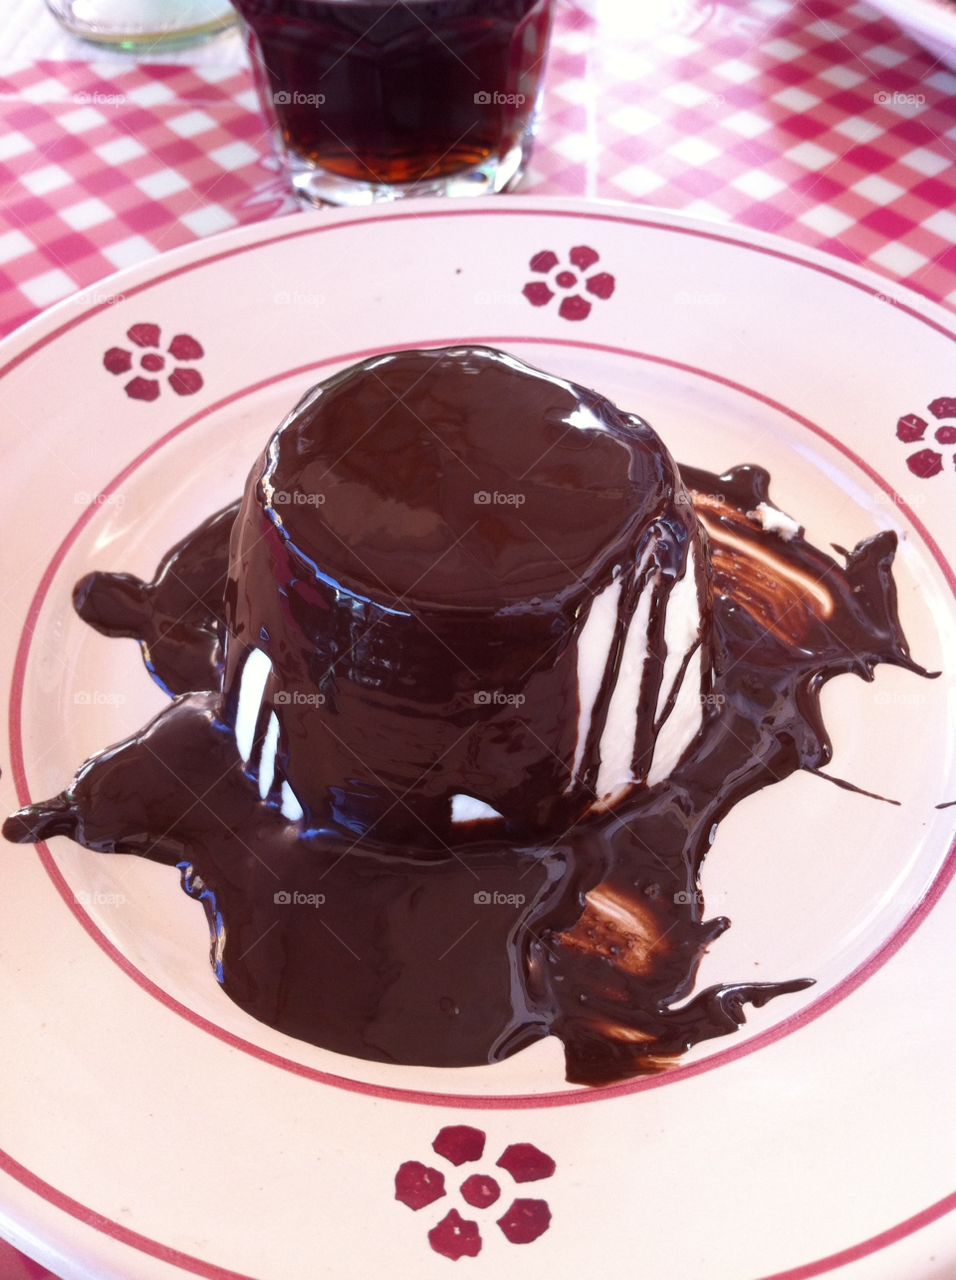 Pudding with chocolate sauce 